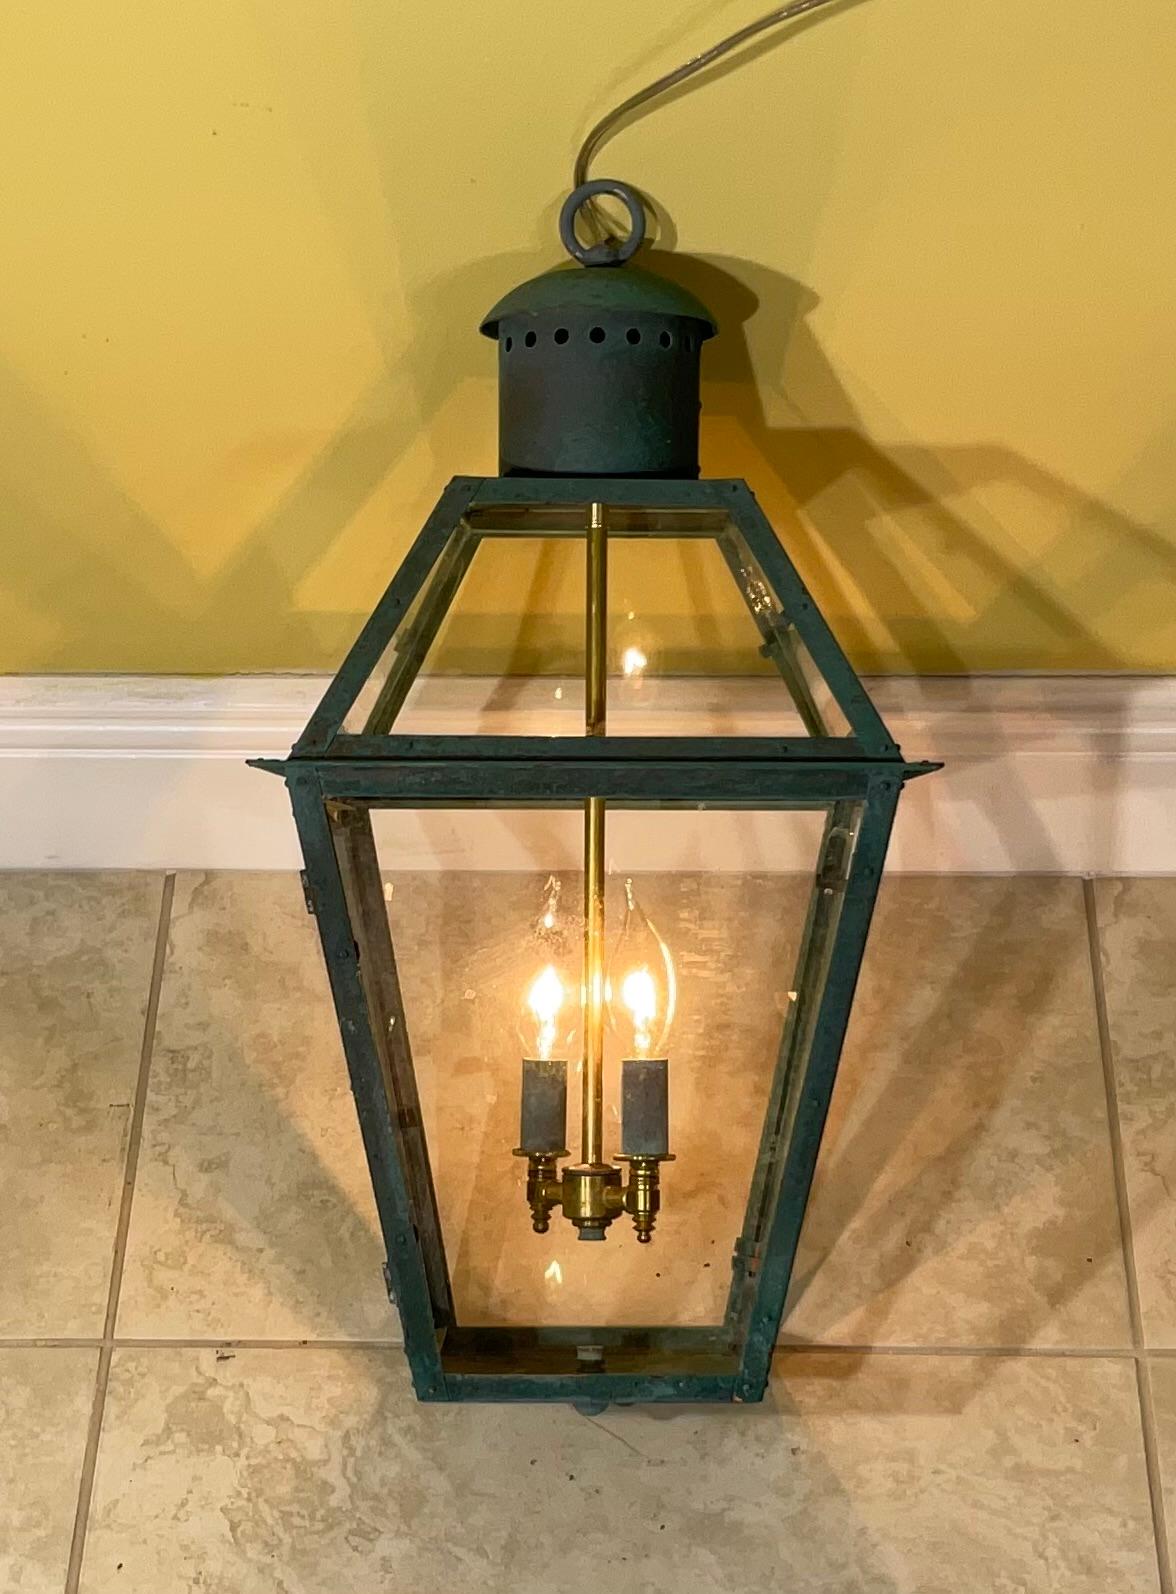 Vintage Quality handmade solid copper lantern with three 60/watt lights.
Electrified and ready to light. Beautiful oxidization patina.
Could be used in wet location and indoor.
Chain and canopy included.